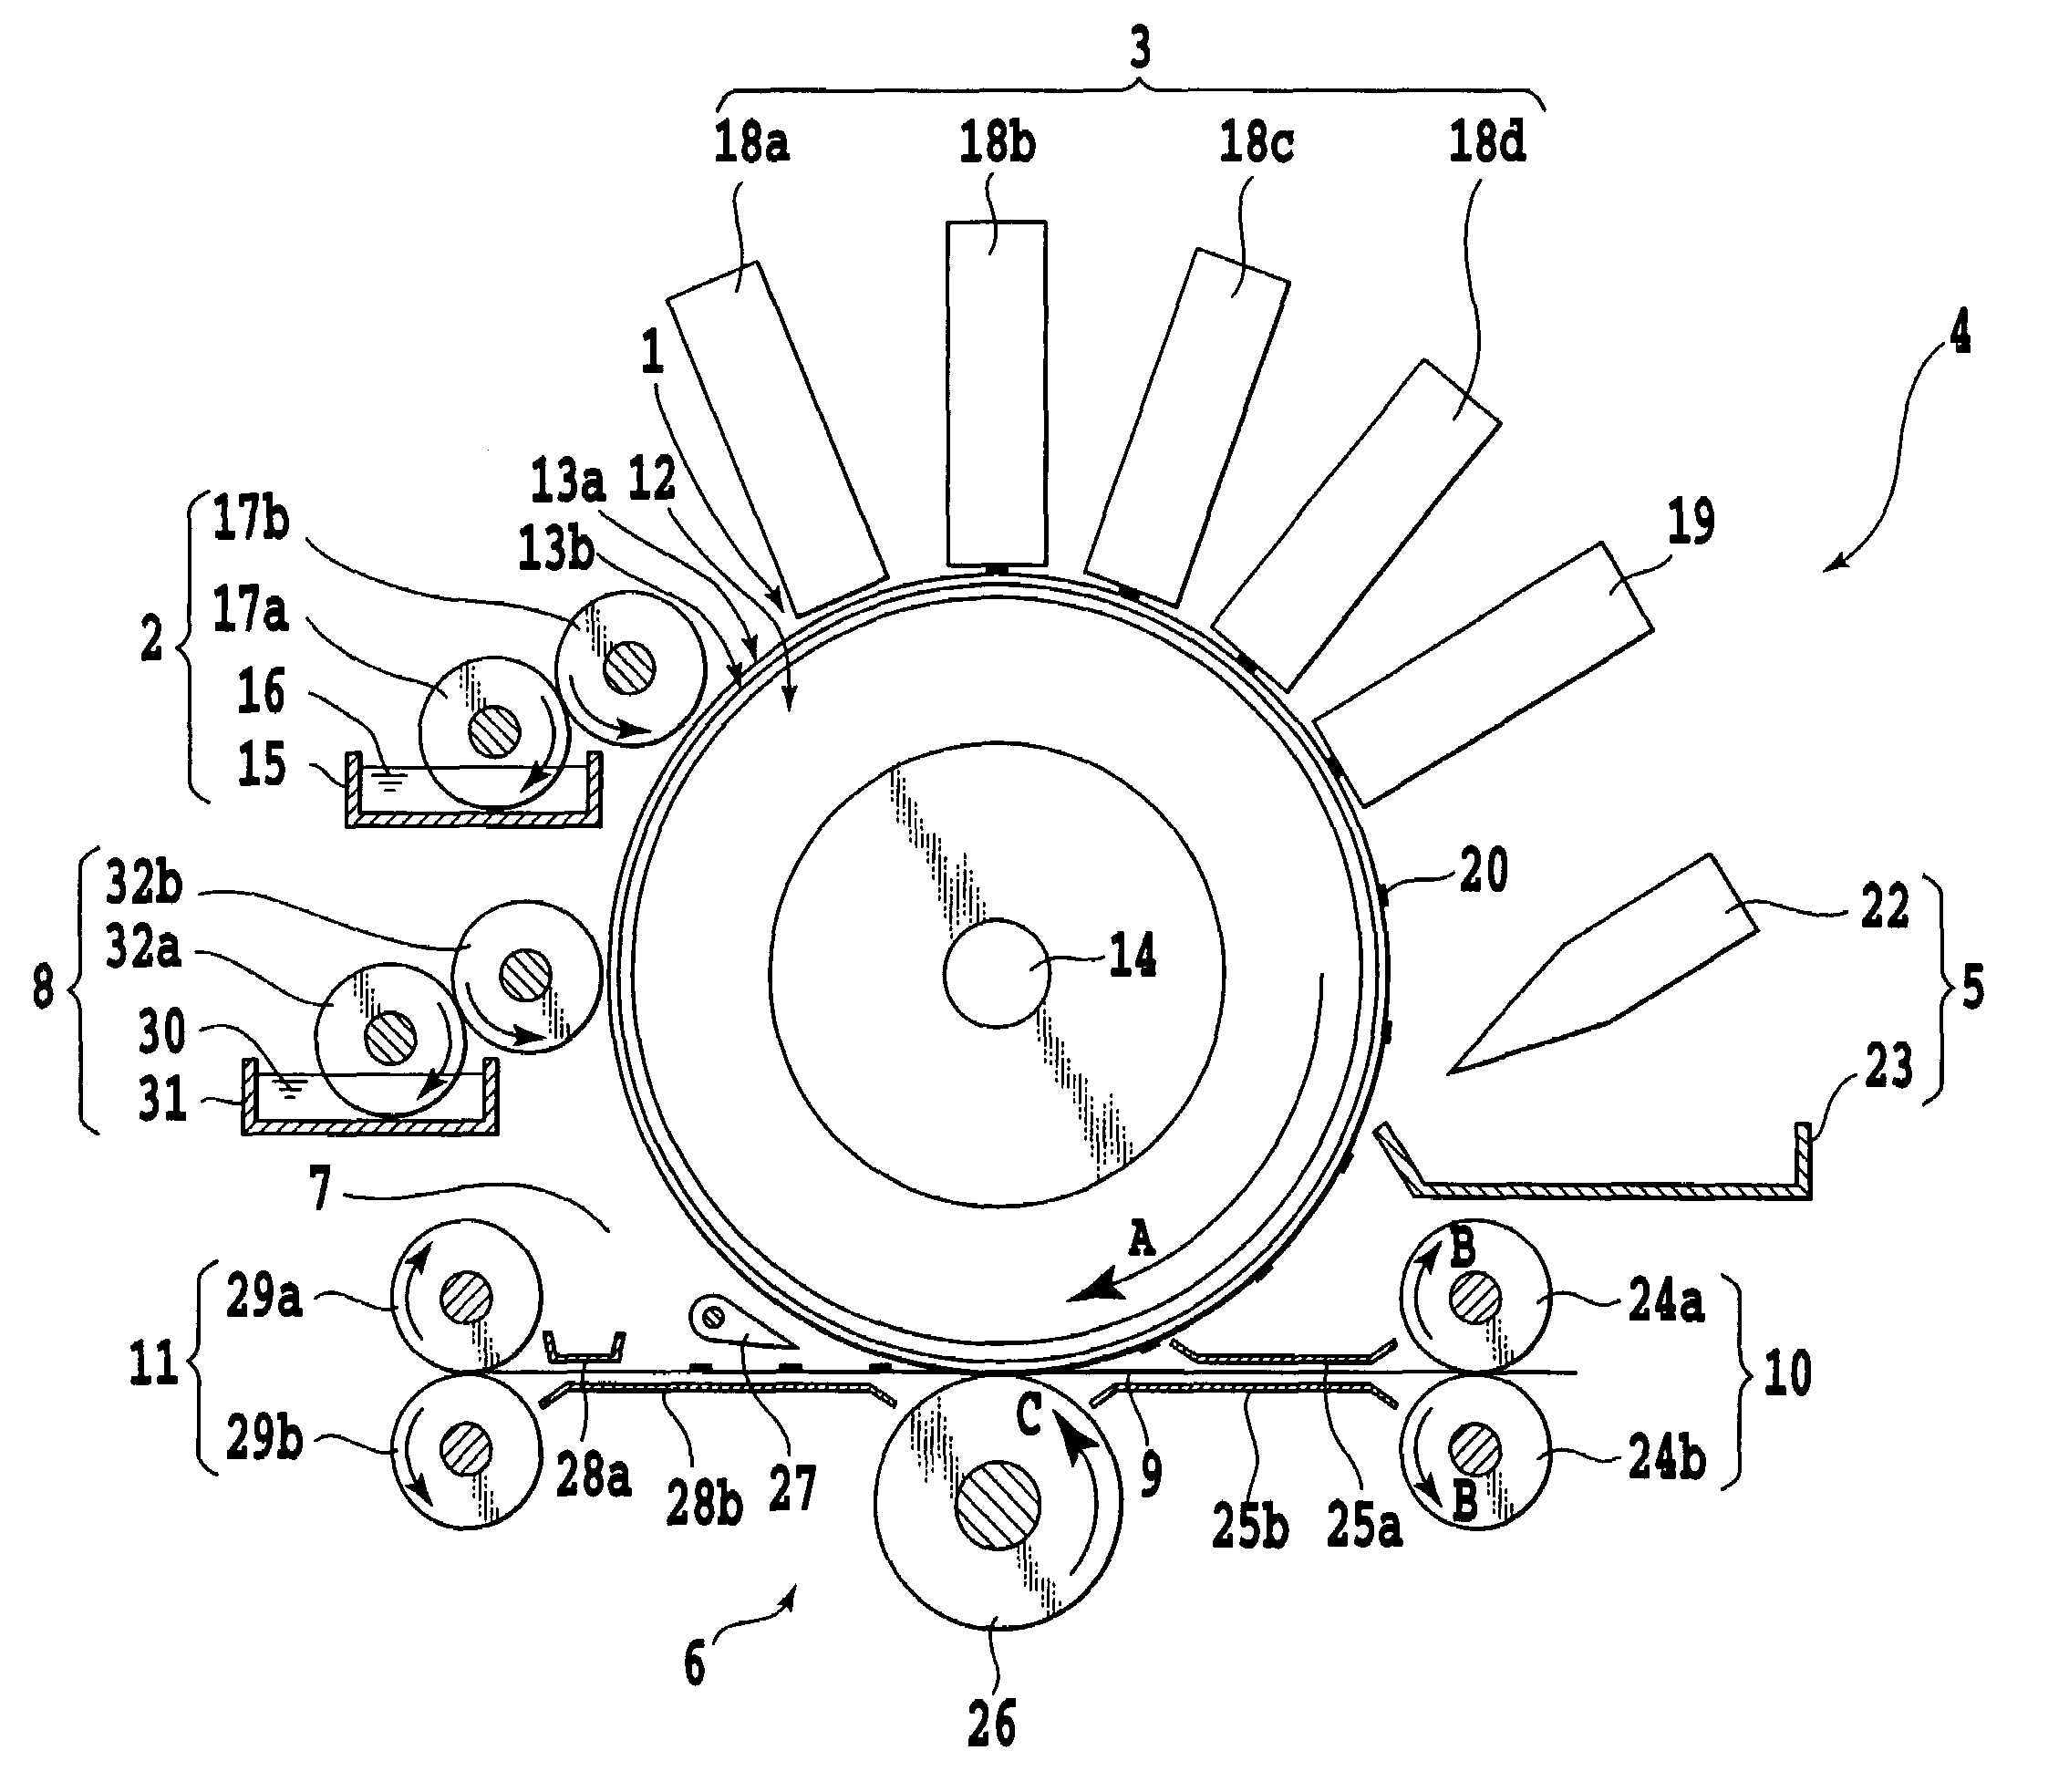 Ink jet recording method and ink jet recording apparatus